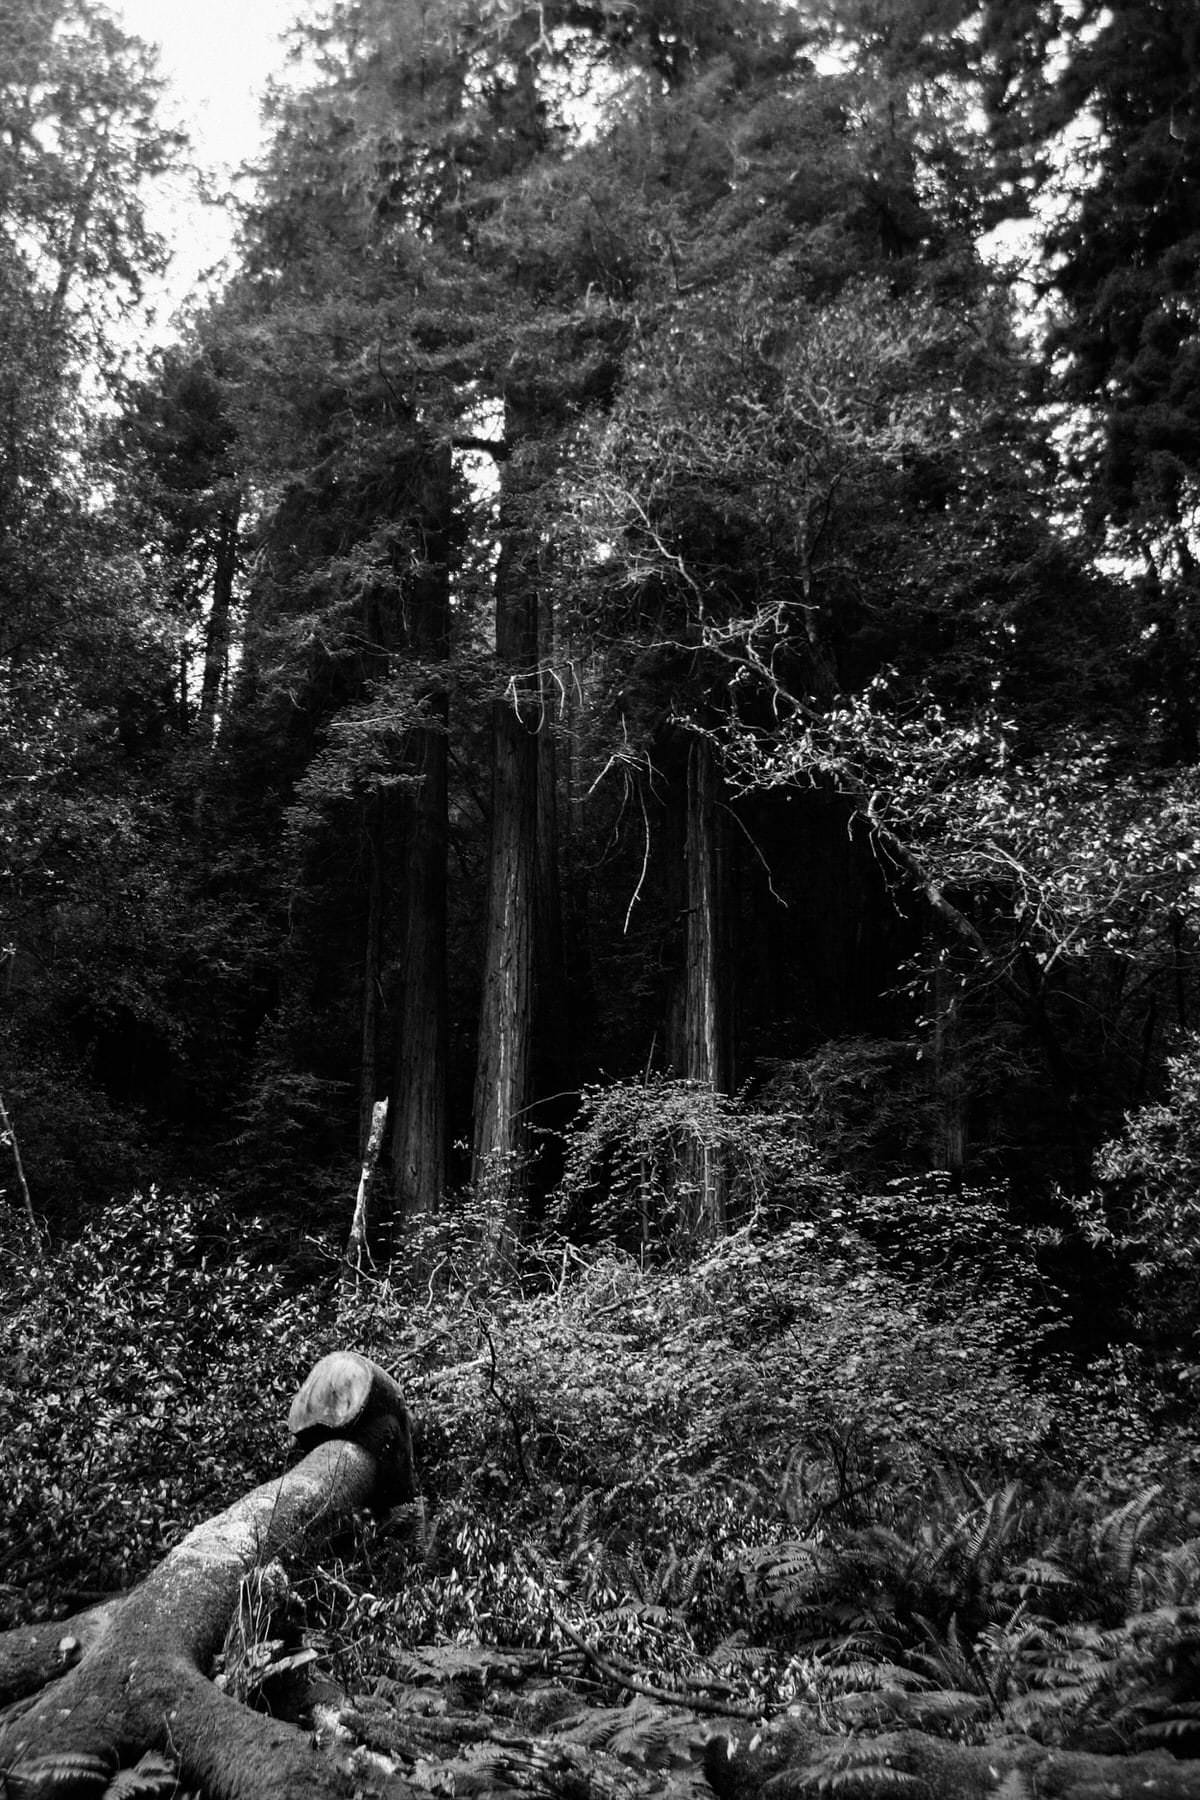 Muir-Woods-National-Monument-California-black-and-white-fine-art-photography-by-Studio-L-photographer-Laura-Schneider-_3570